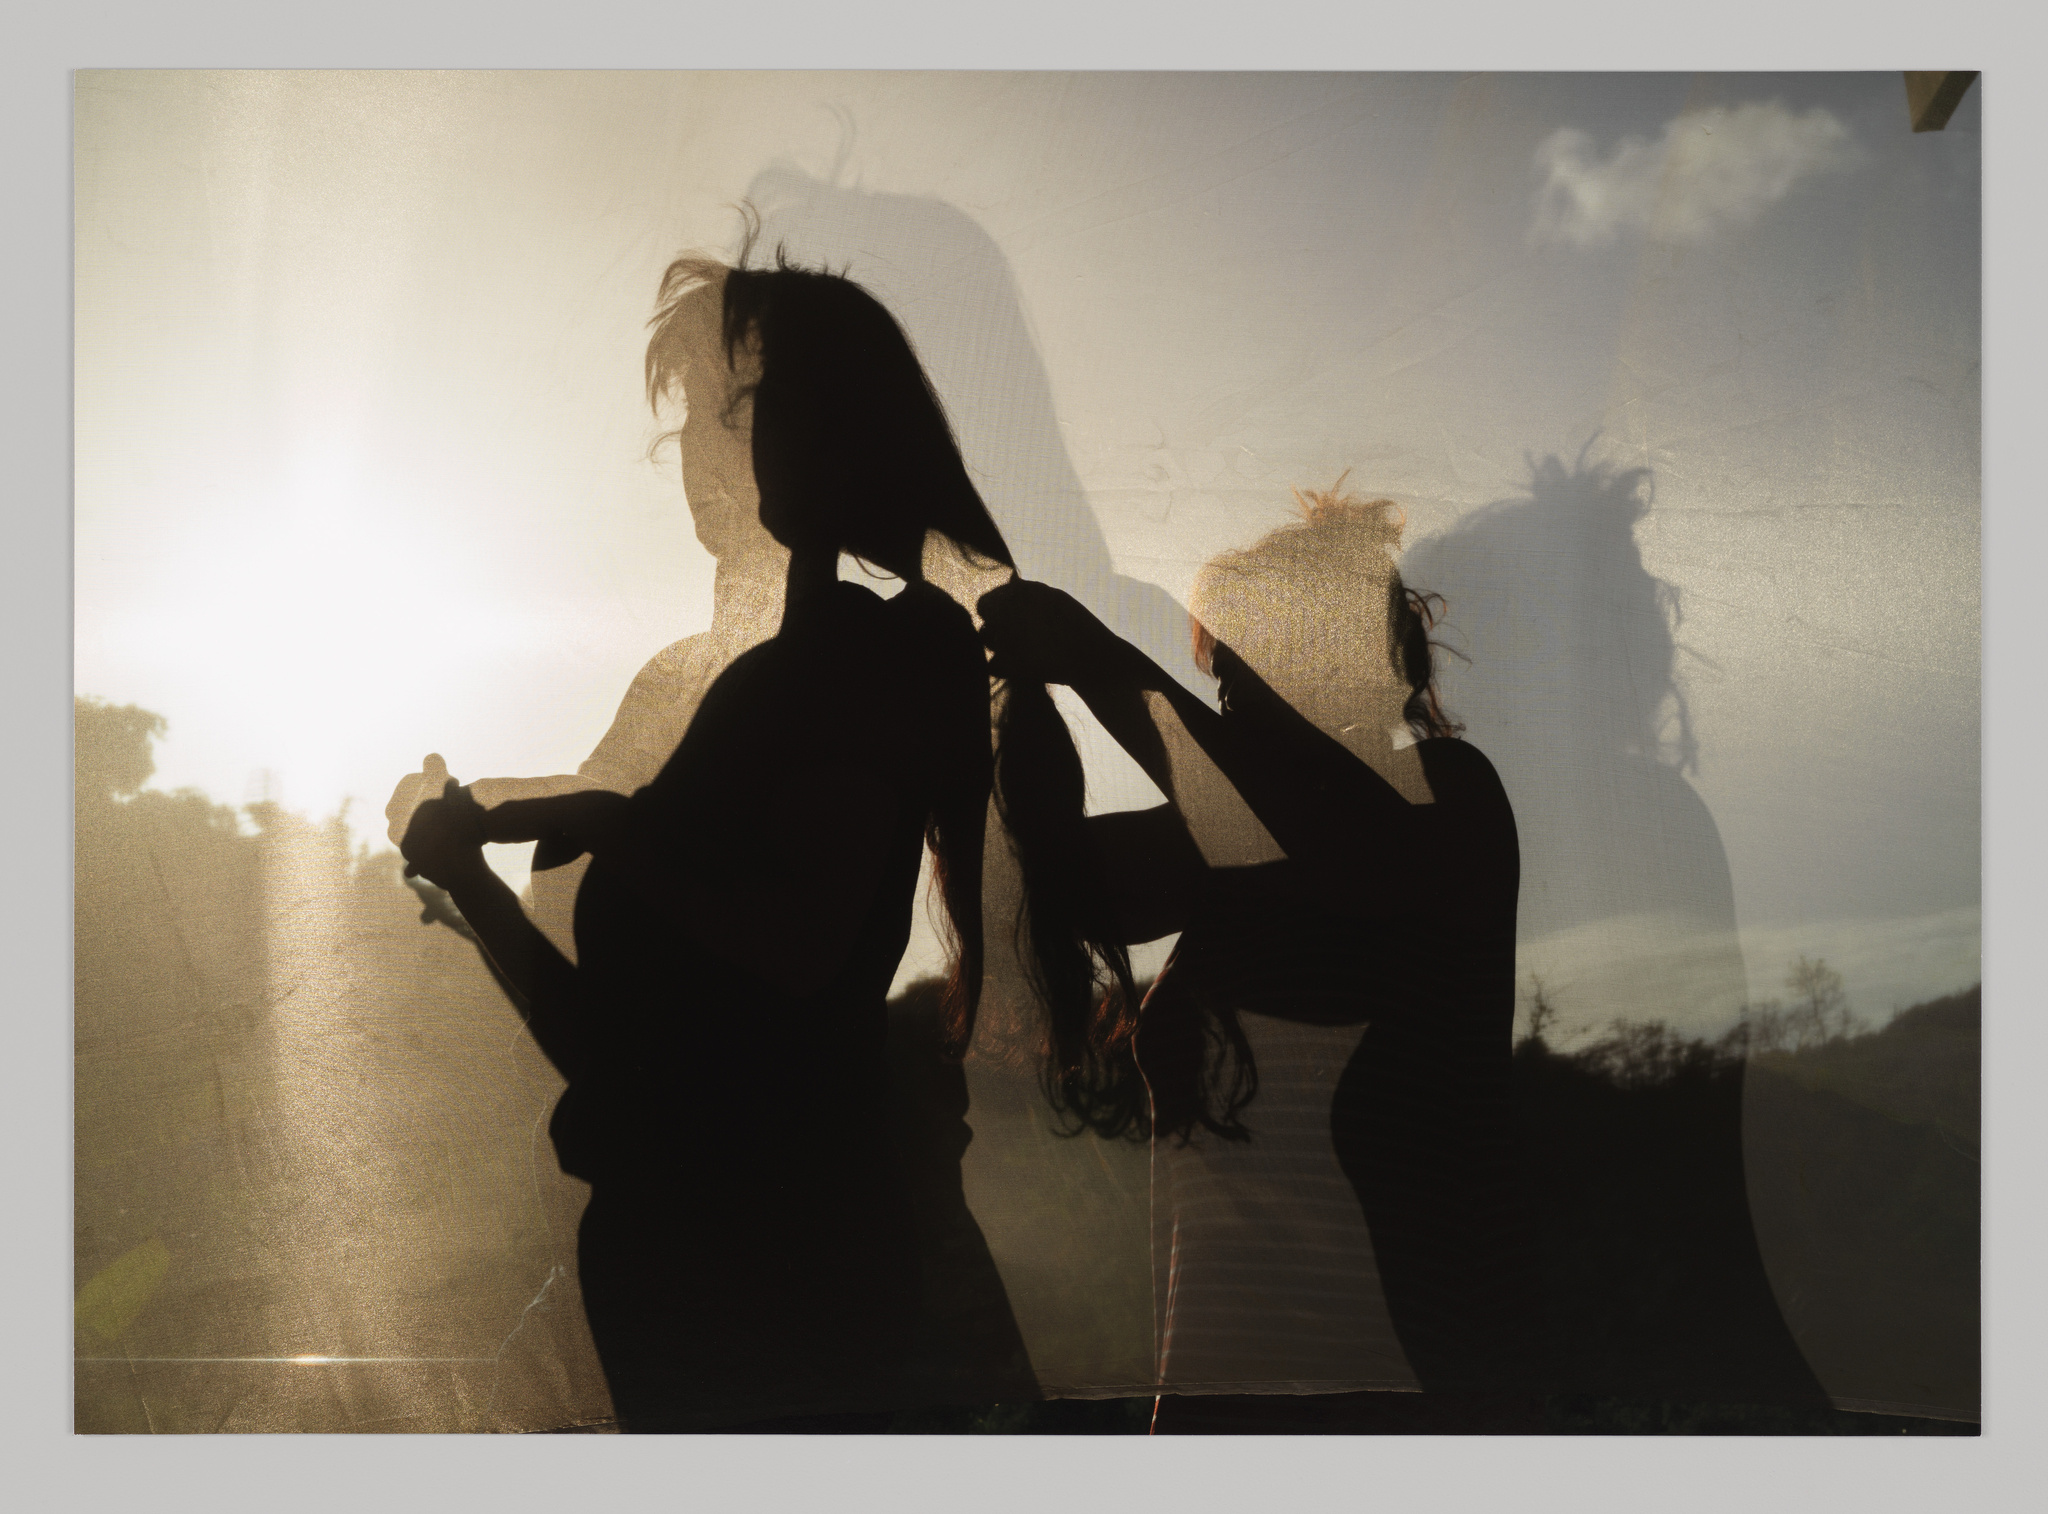 A photo of two figures in silhouette. The shorter figure is braiding the taller figure’s hair.